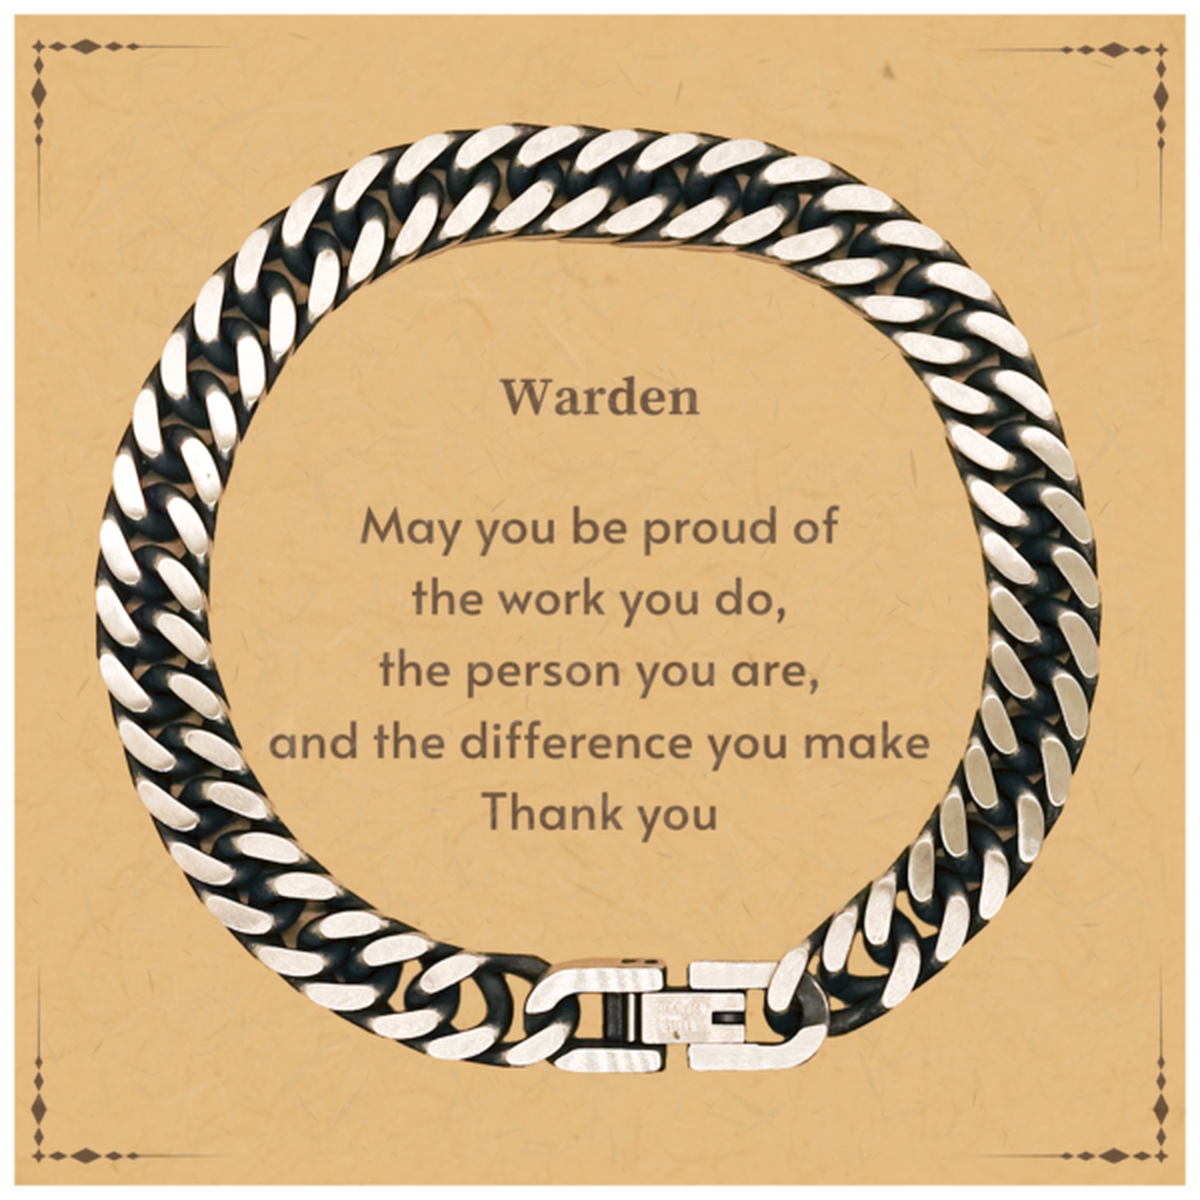 Heartwarming Cuban Link Chain Bracelet Retirement Coworkers Gifts for Warden, Warden May You be proud of the work you do, the person you are Gifts for Boss Men Women Friends